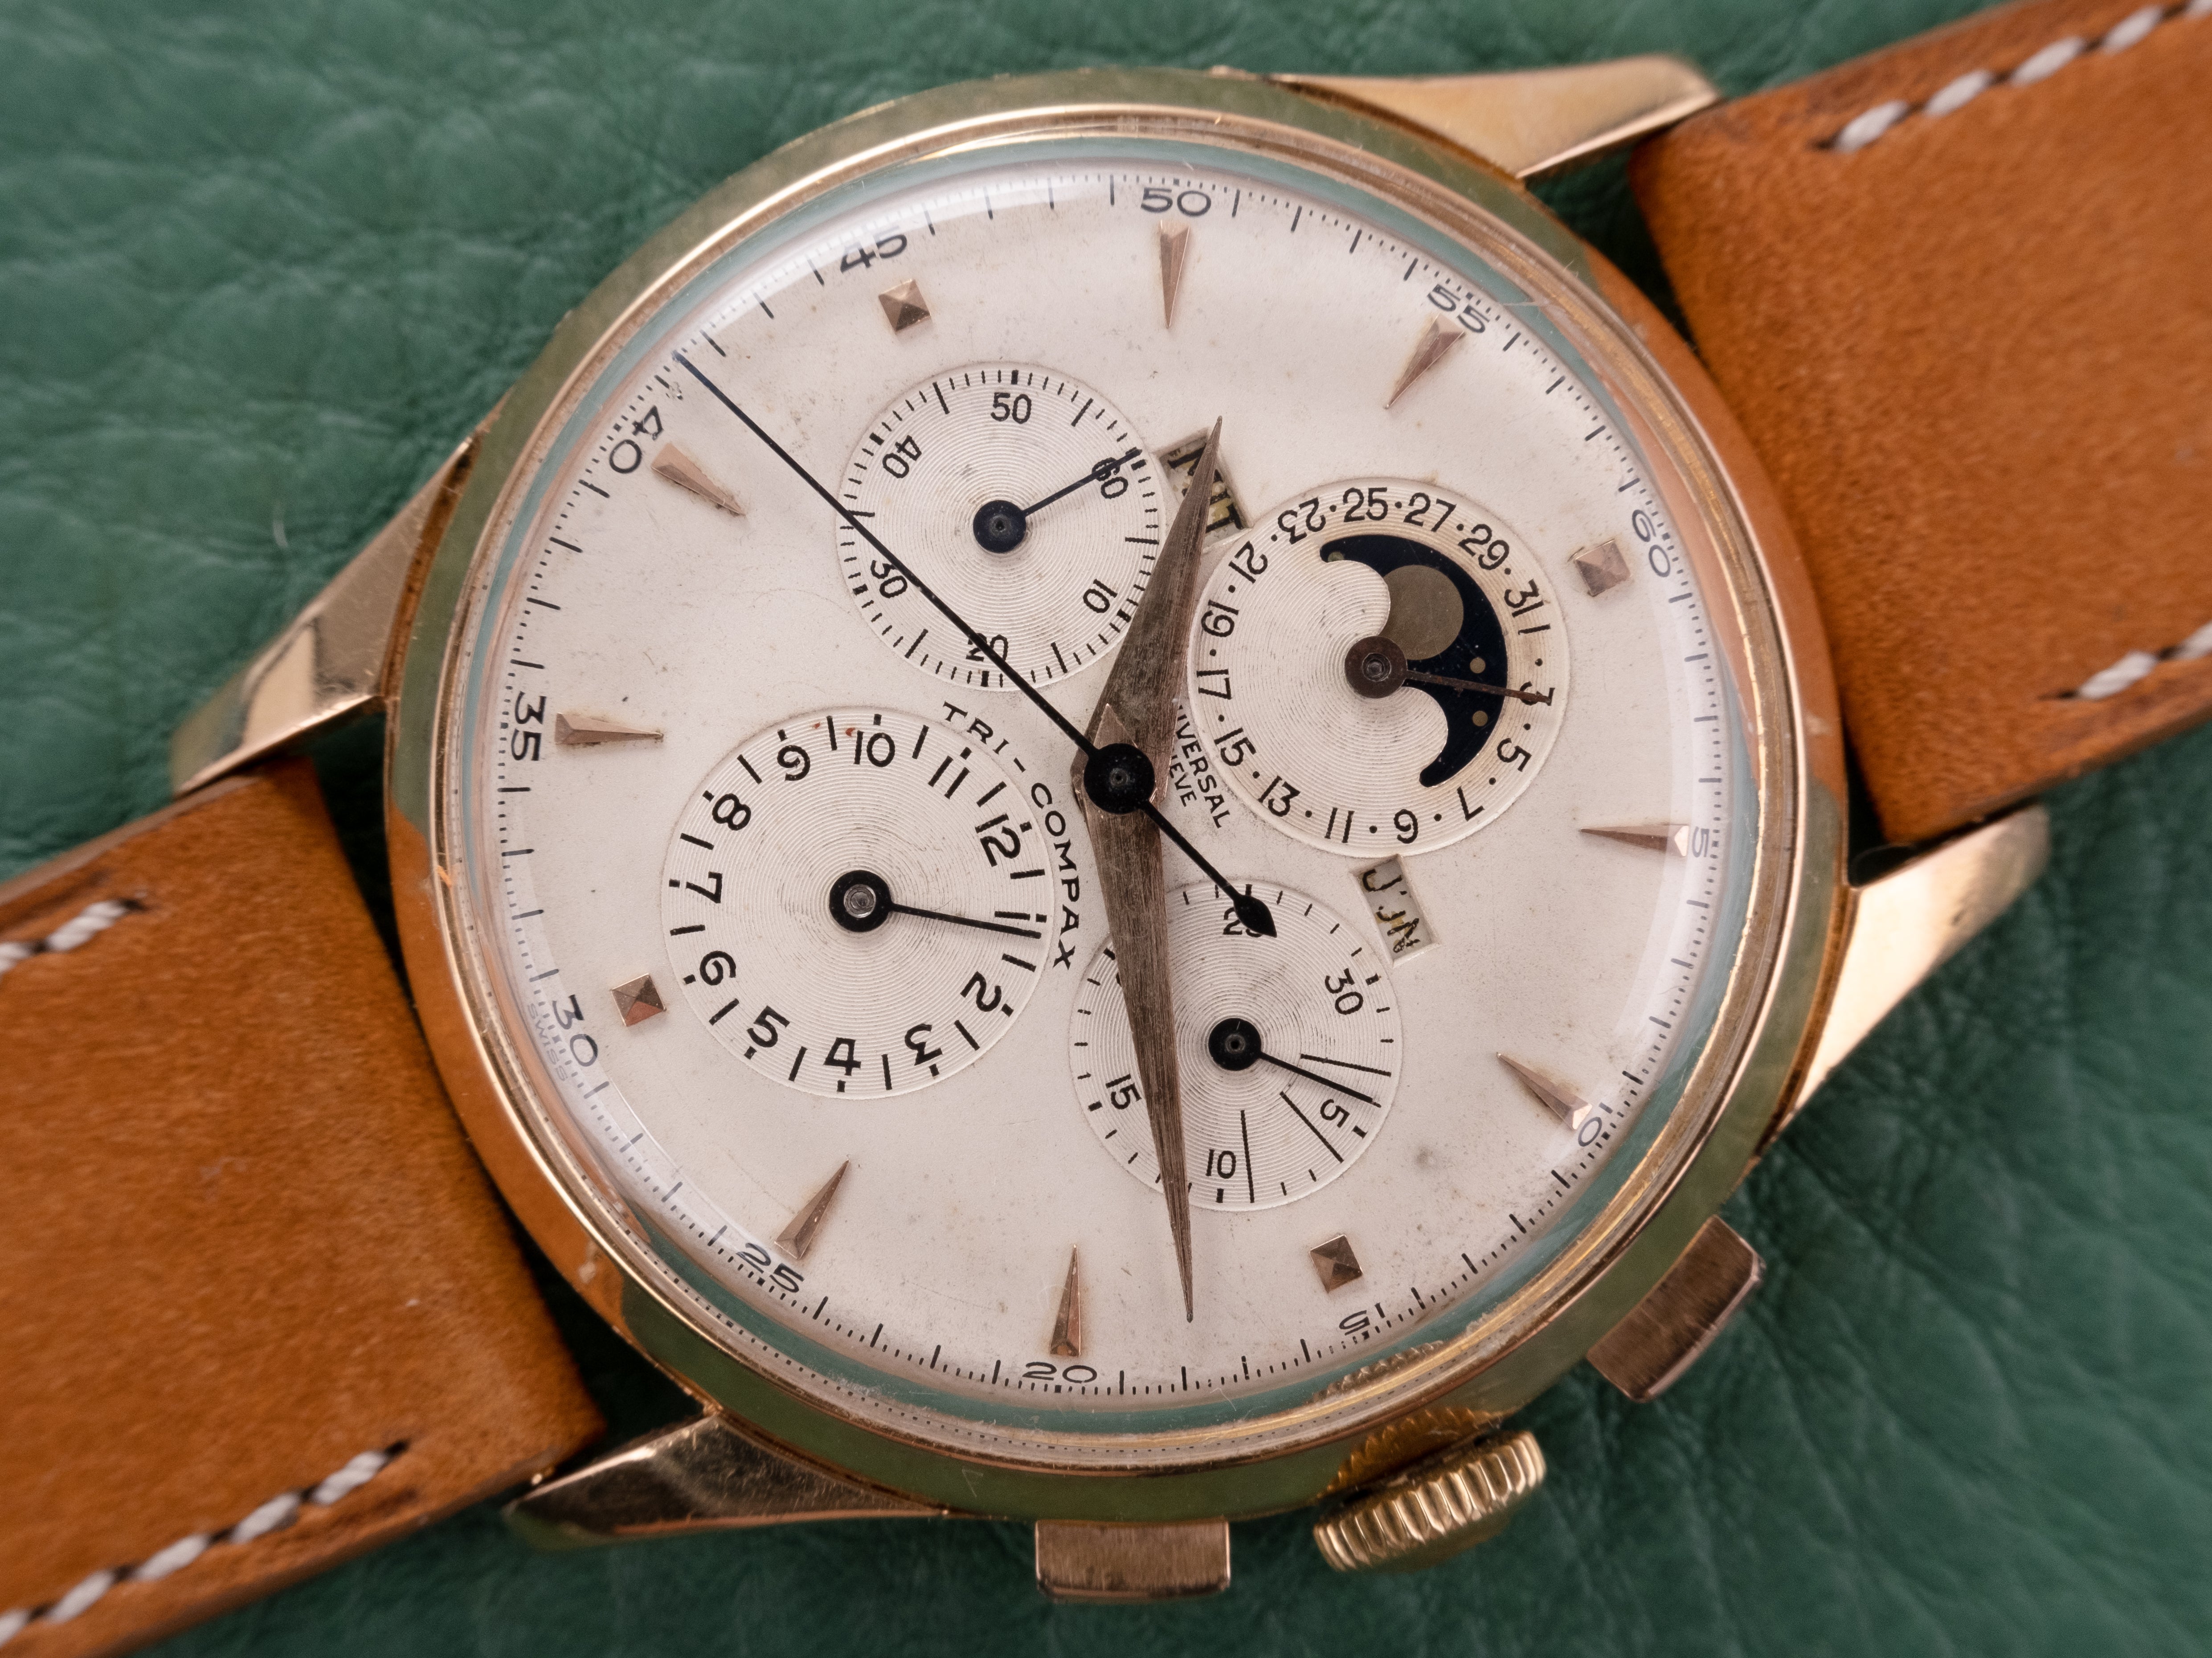 UNIVERSAL GENEVE 18k Gold Tri Compax Chronograph Moonphase Ref 12285 (1950)